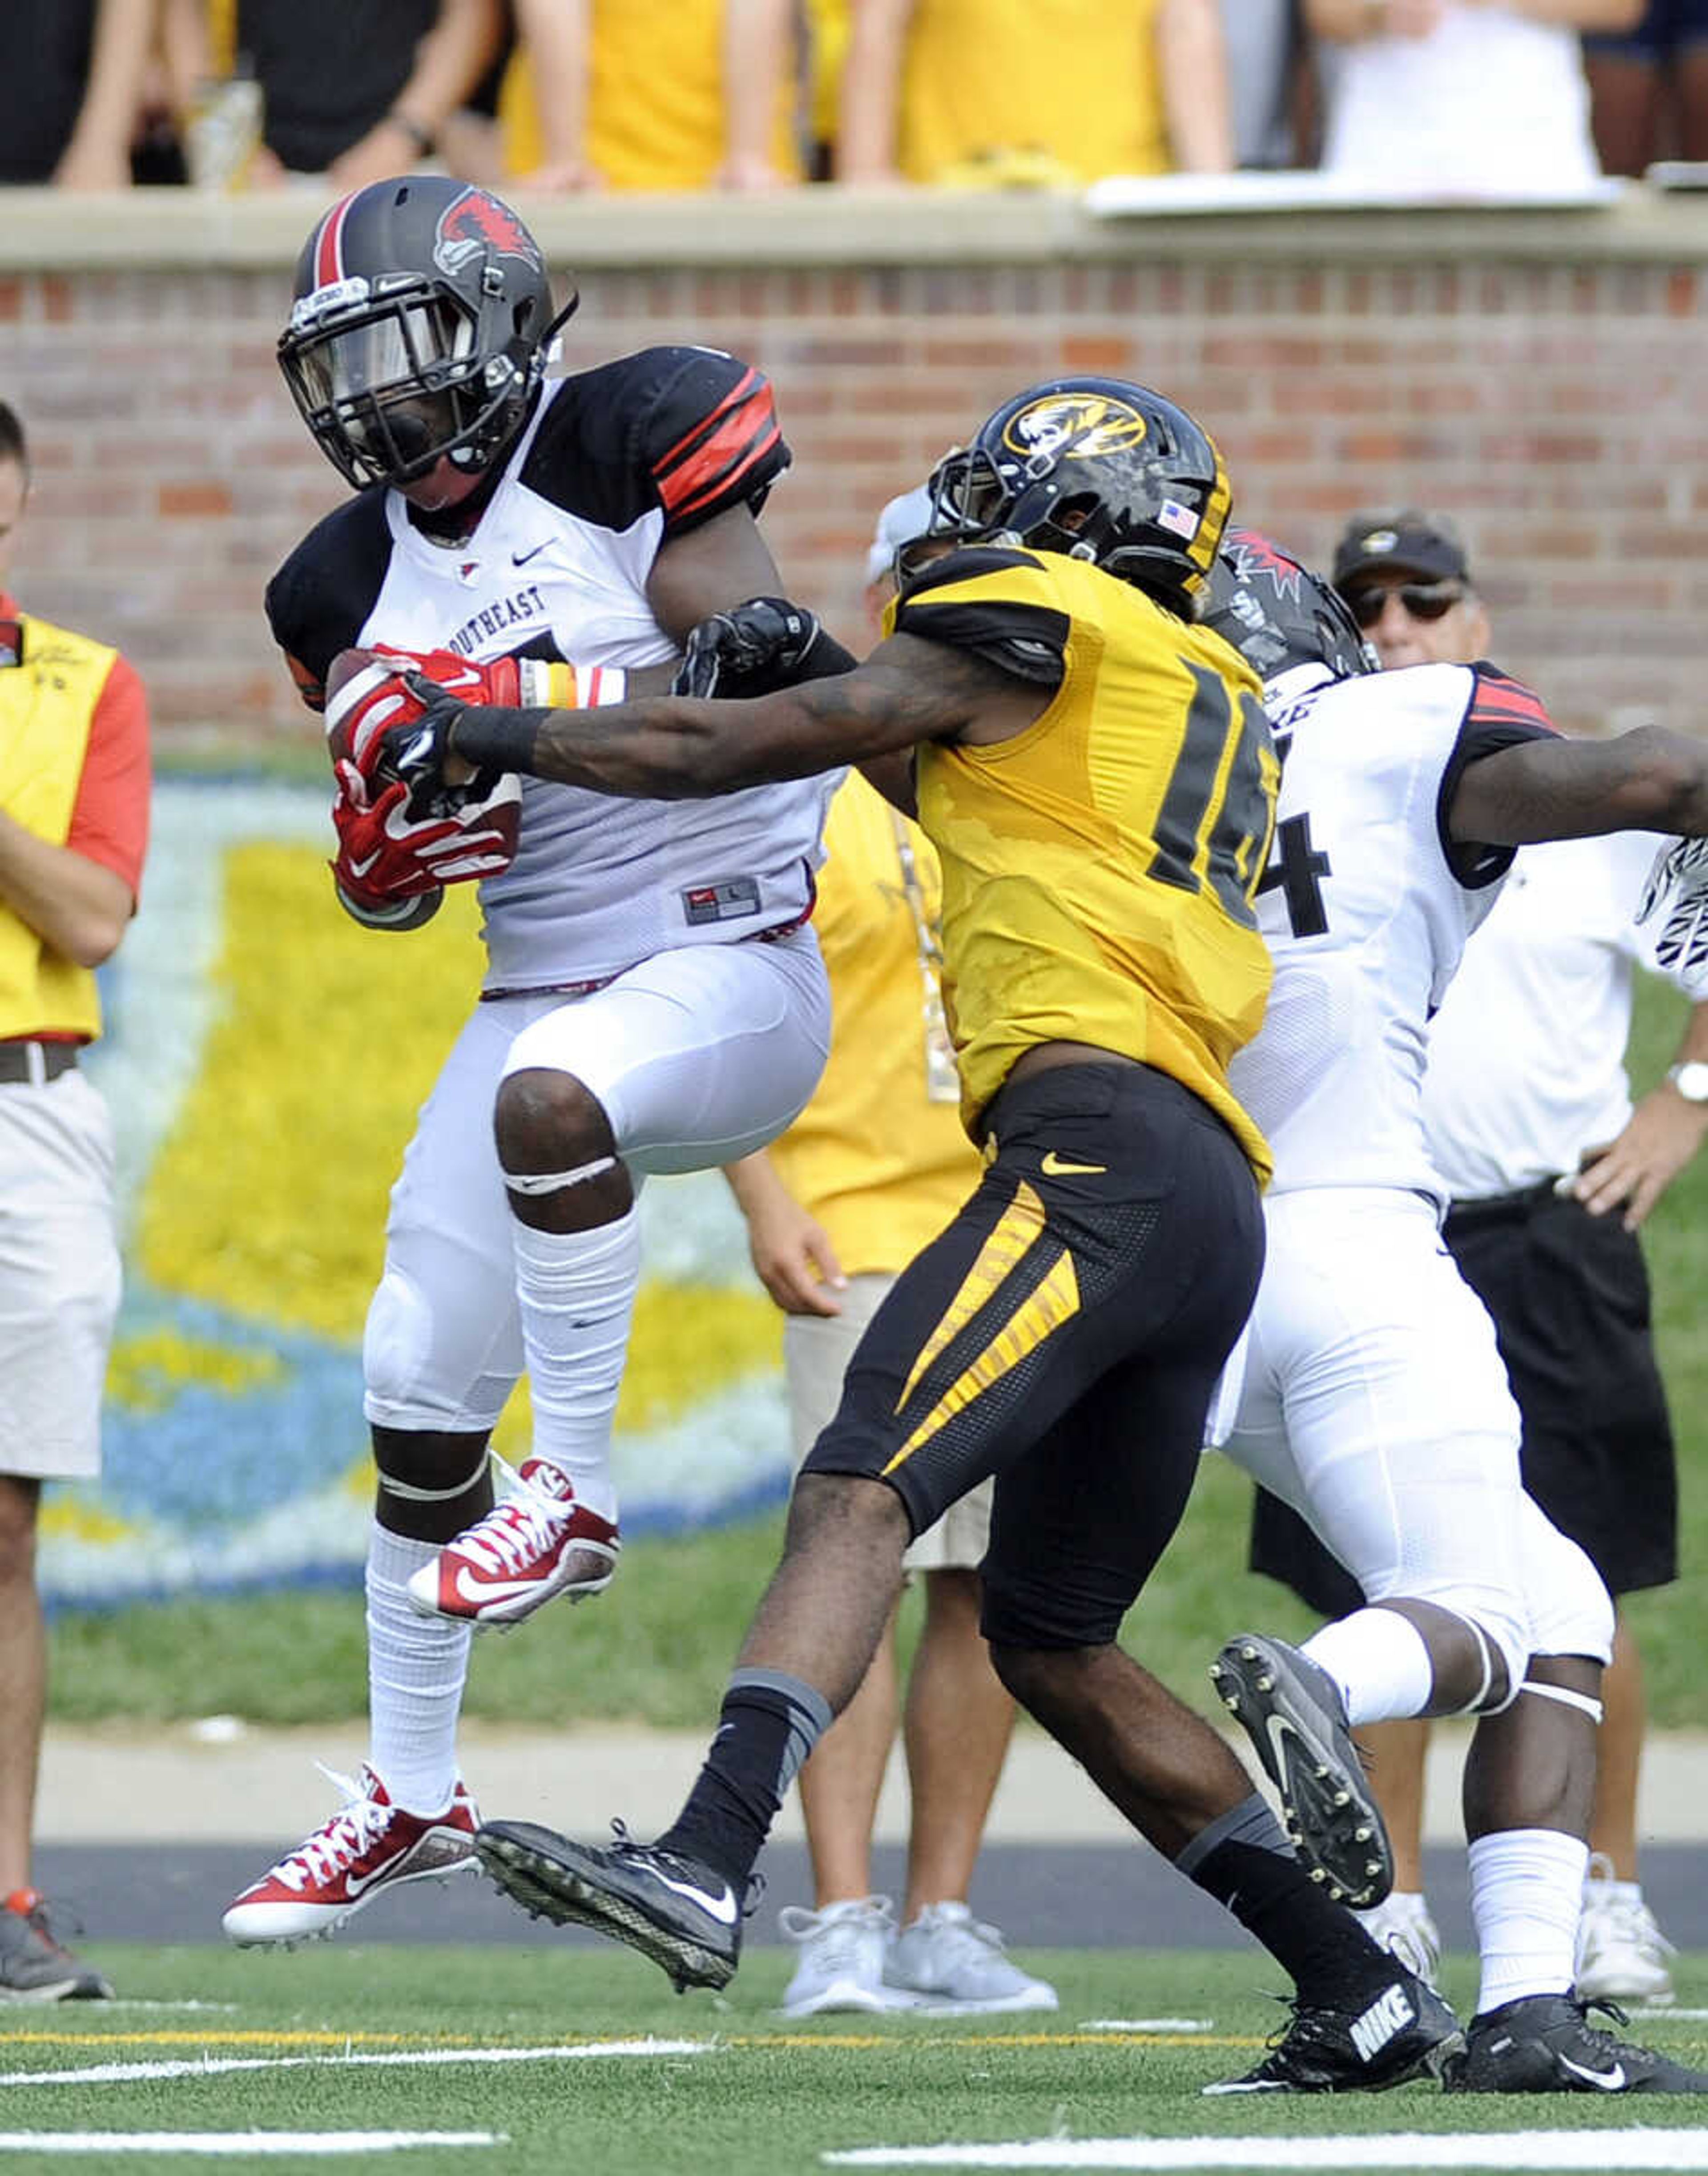 Southeast Missouri State football team loses first game 34-3 to Missouri